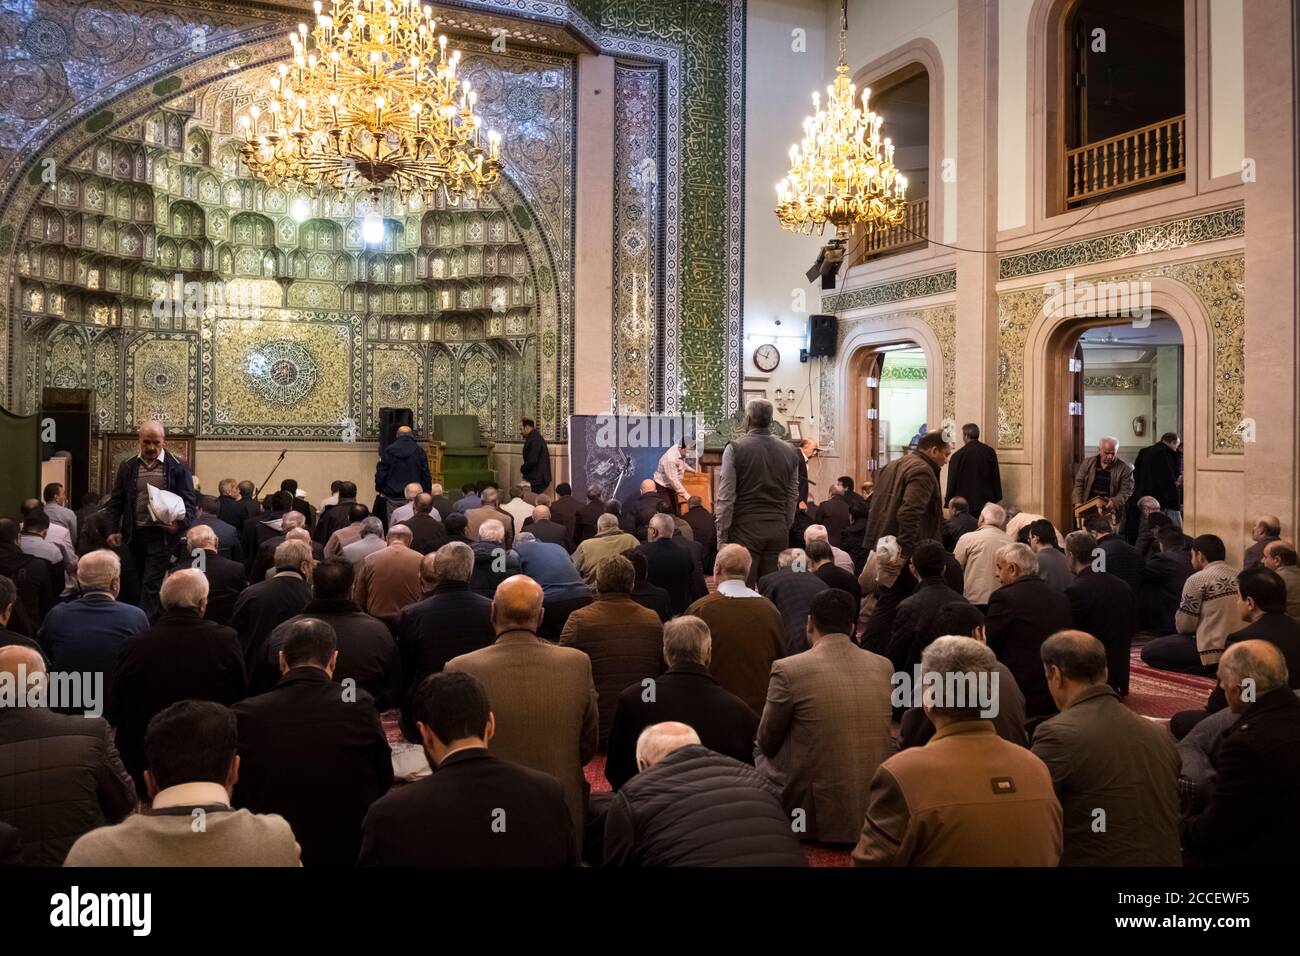 Iran, Isfahan, Friday prayers in a Shiite mosque Stock Photo